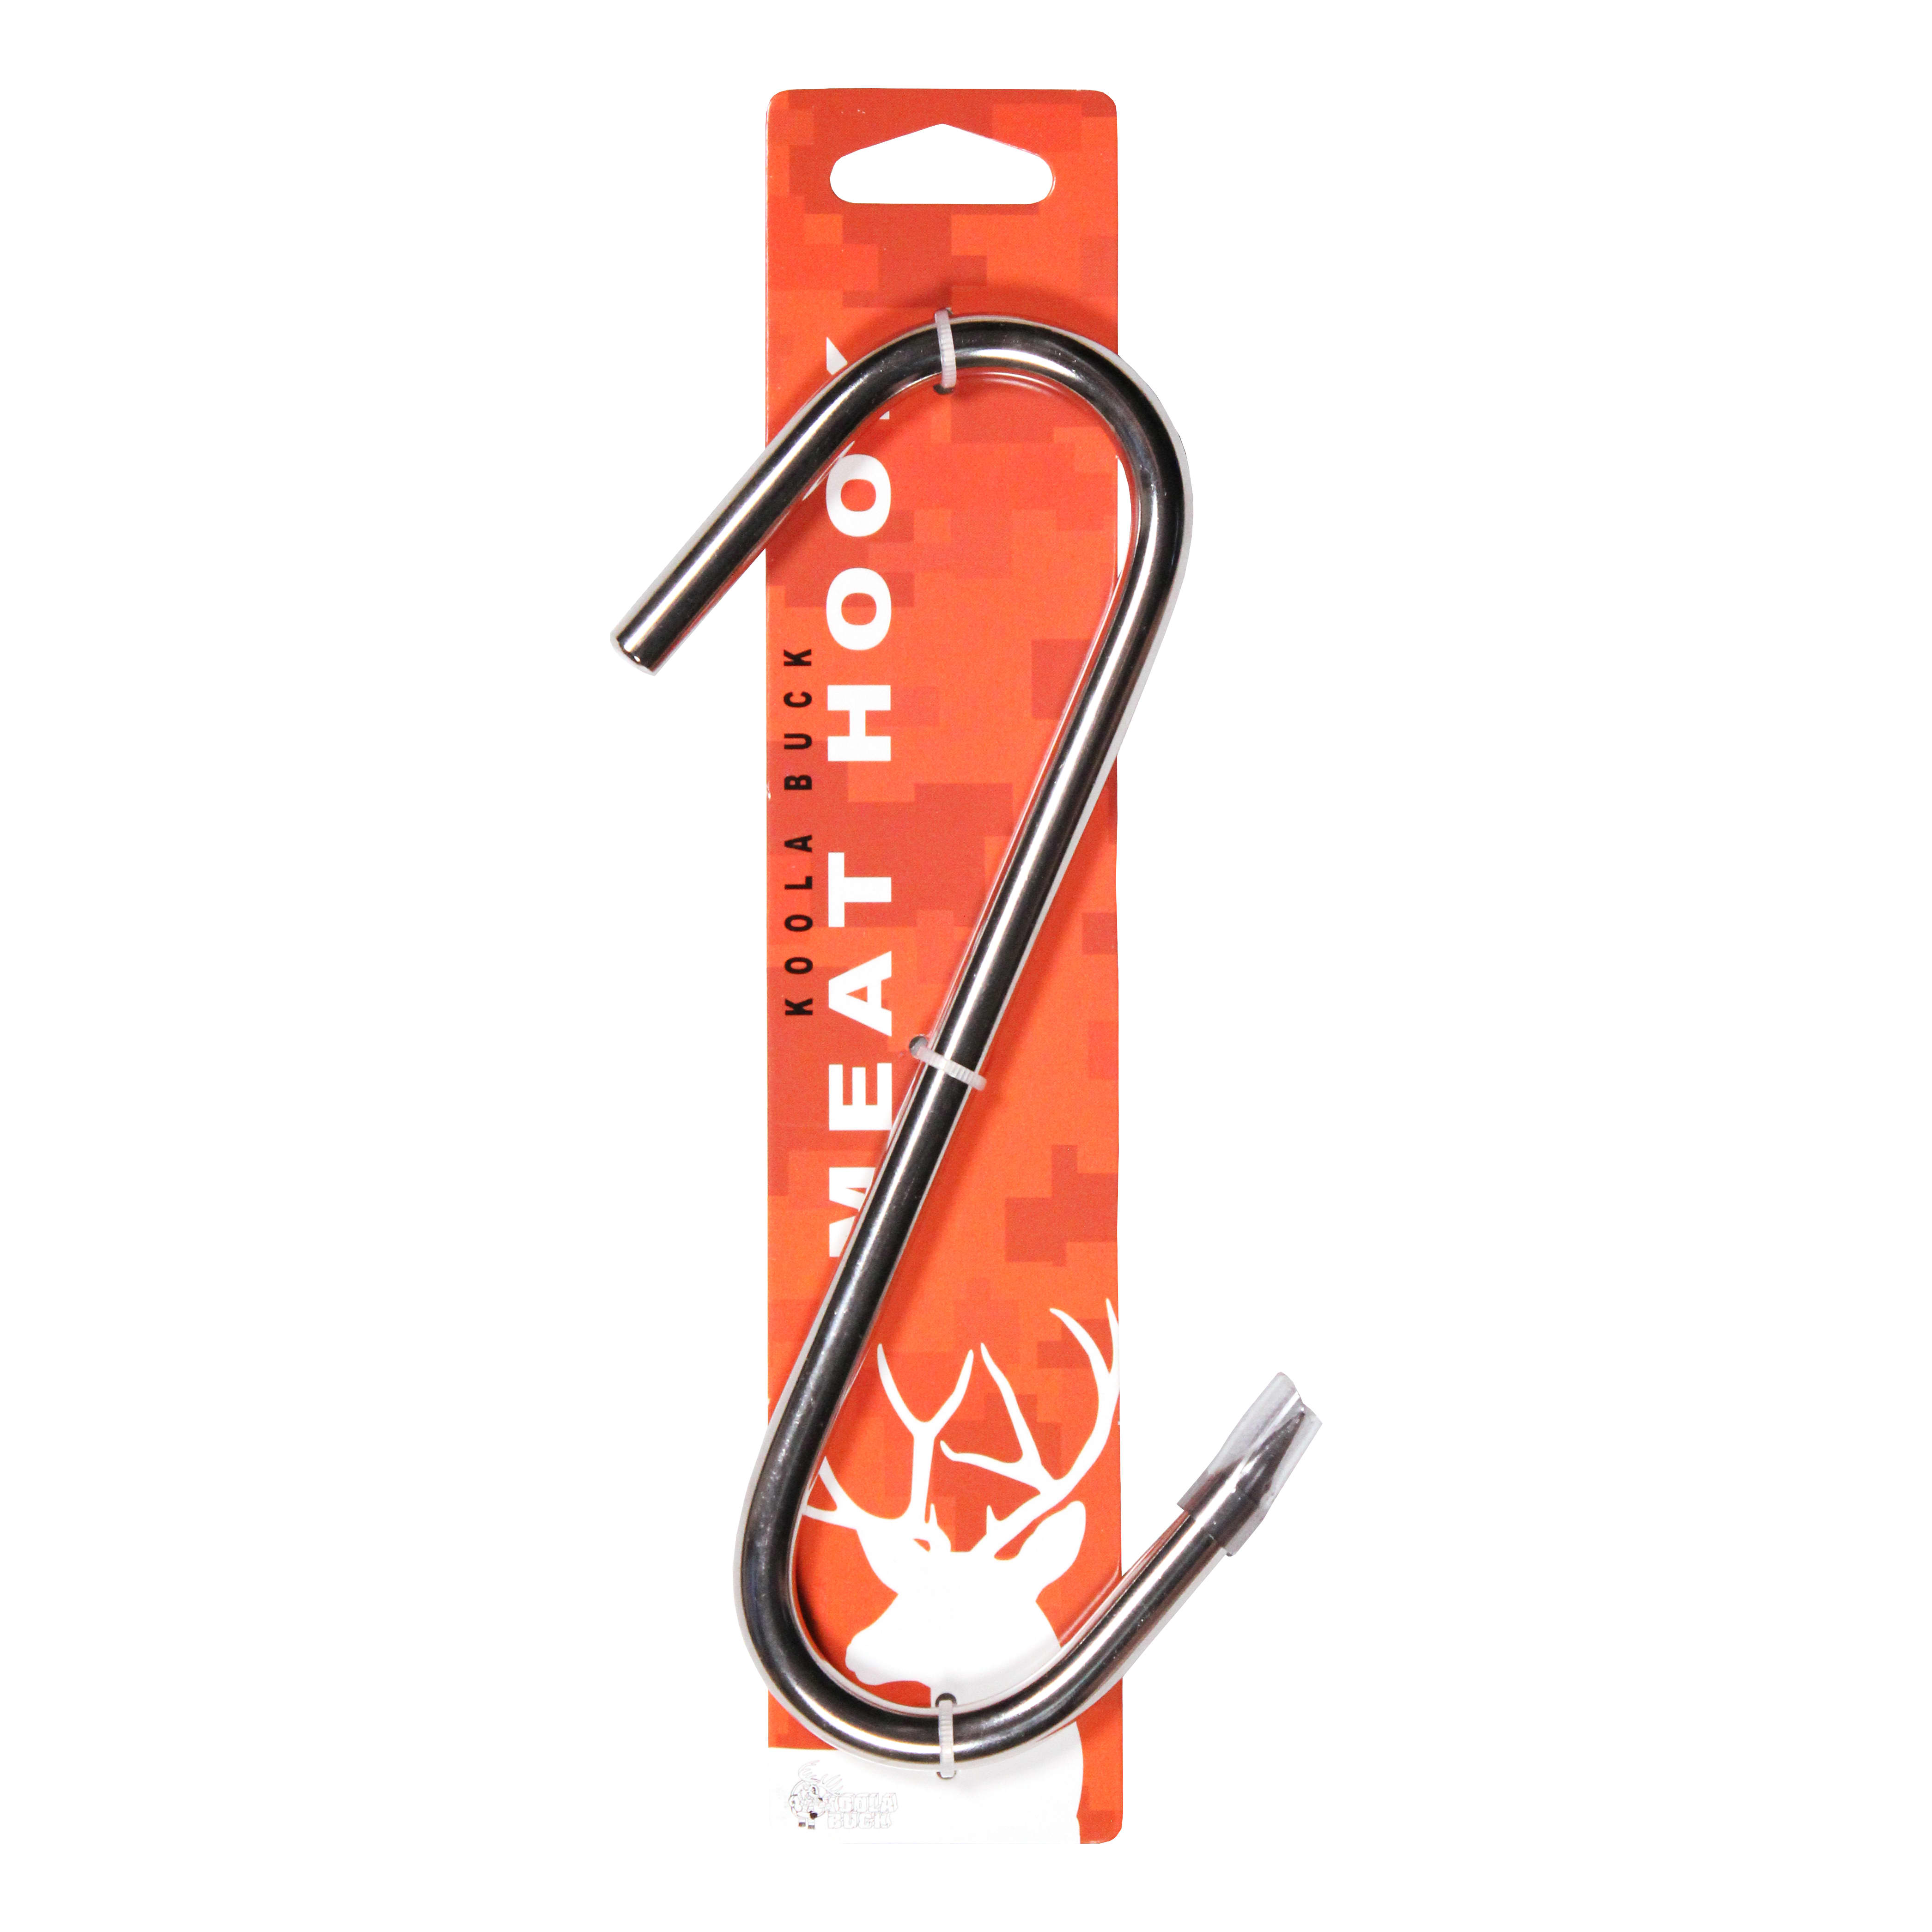 Cox & Rawle Meat Hook - Black, Size 2/0 : : Sports & Outdoors